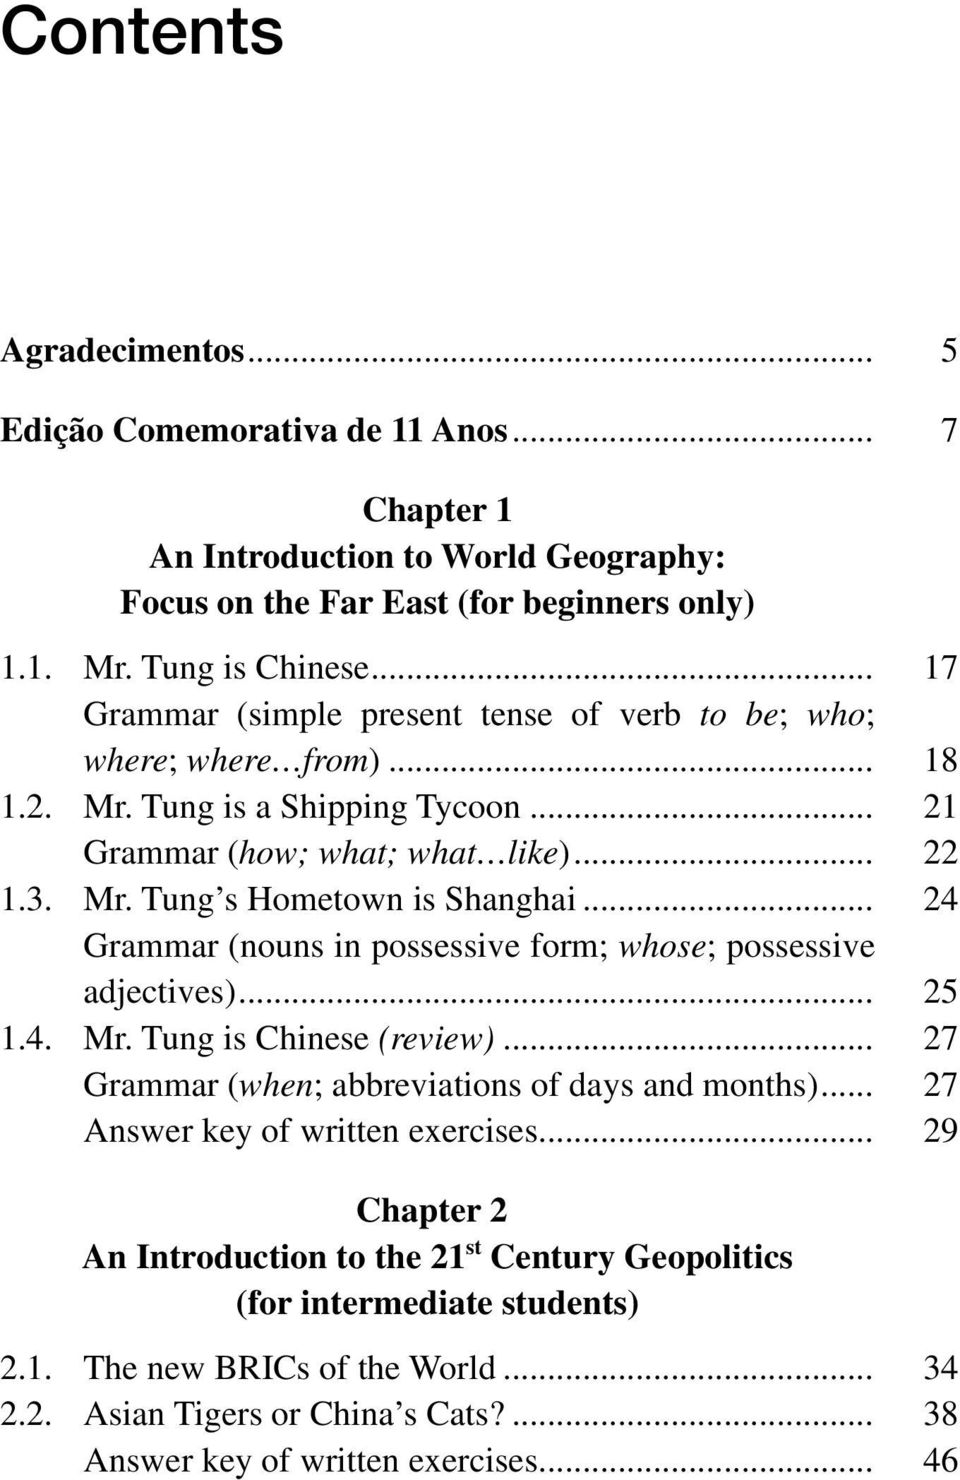 .. 24 Grammar (nouns in possessive form; whose; possessive adjectives)... 25 1.4. Mr. Tung is Chinese (review)... 27 Grammar (when; abbreviations of days and months).